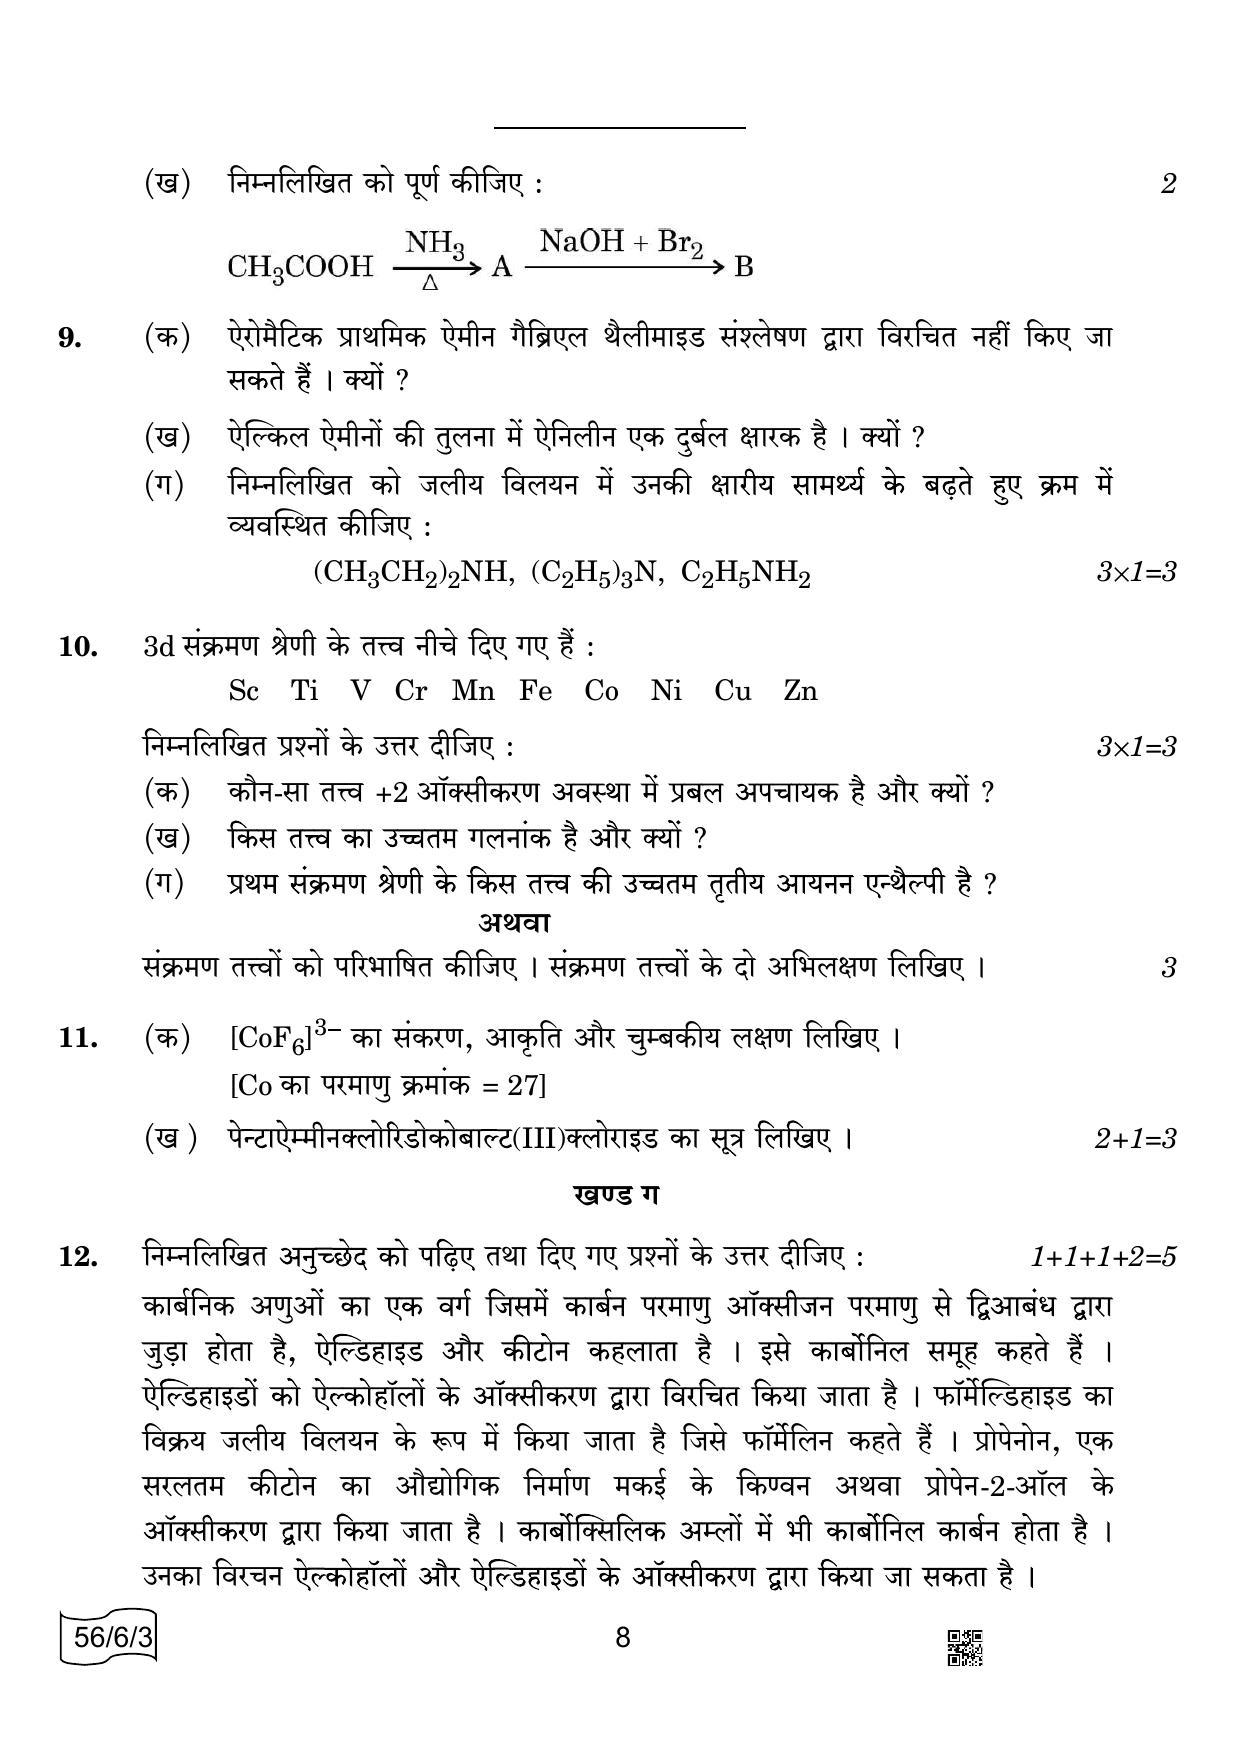 CBSE Class 12 56-6-3 CHEMISTRY 2022 Compartment Question Paper - Page 8